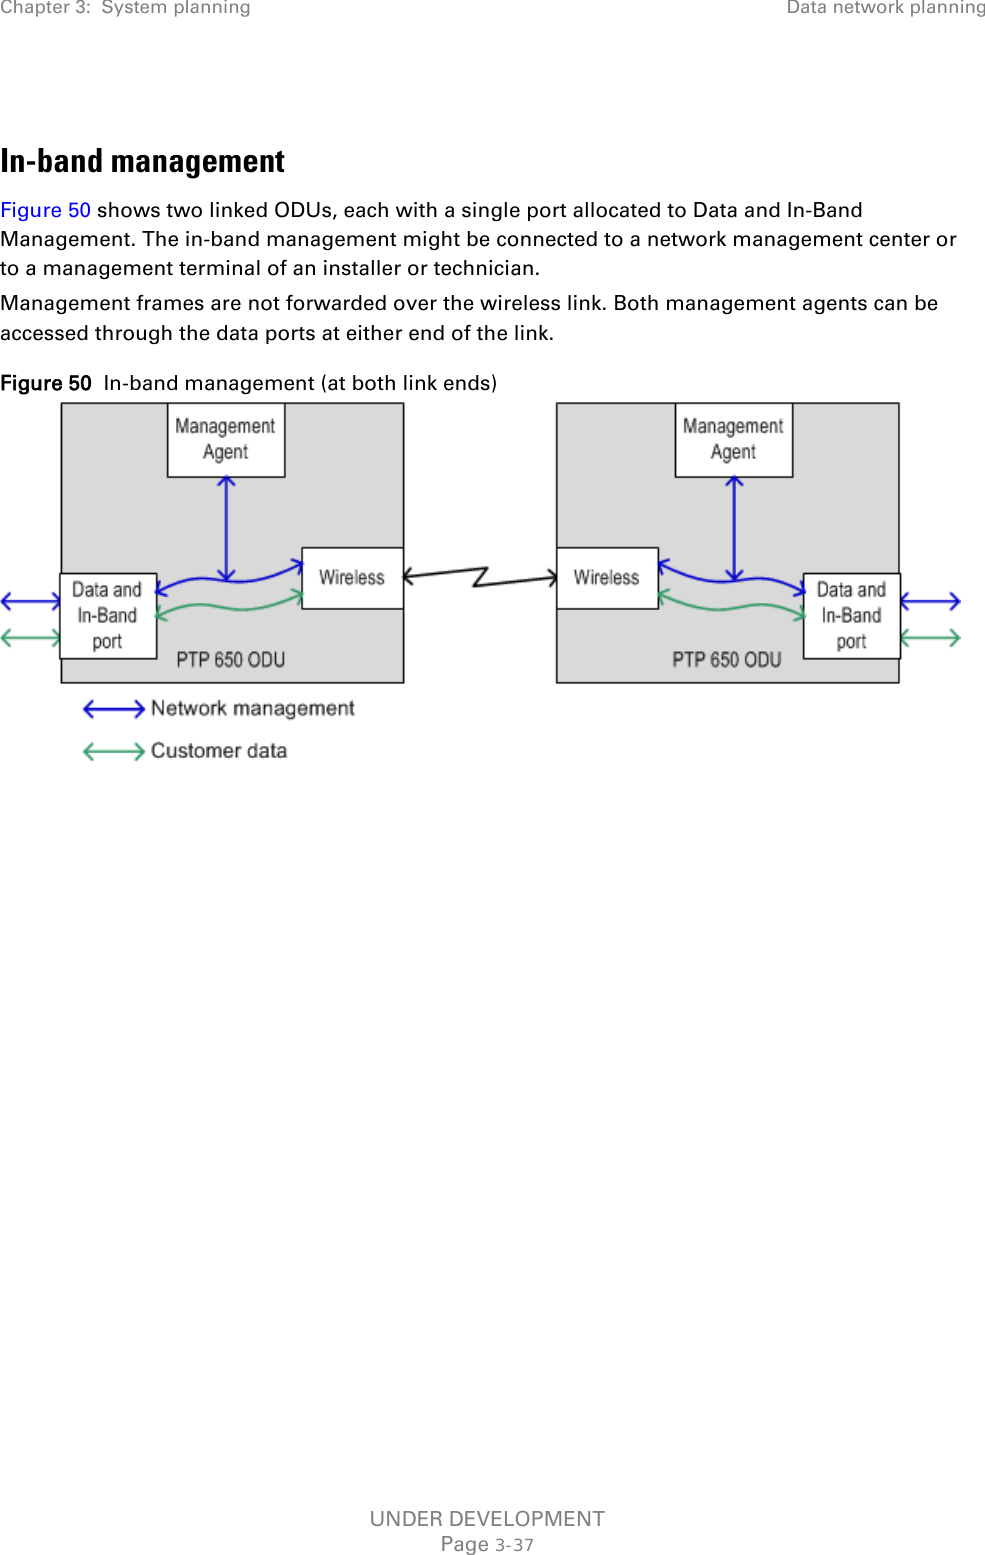 Chapter 3:  System planning Data network planning   In-band management Figure 50 shows two linked ODUs, each with a single port allocated to Data and In-Band Management. The in-band management might be connected to a network management center or to a management terminal of an installer or technician. Management frames are not forwarded over the wireless link. Both management agents can be accessed through the data ports at either end of the link. Figure 50  In-band management (at both link ends)      UNDER DEVELOPMENT Page 3-37 